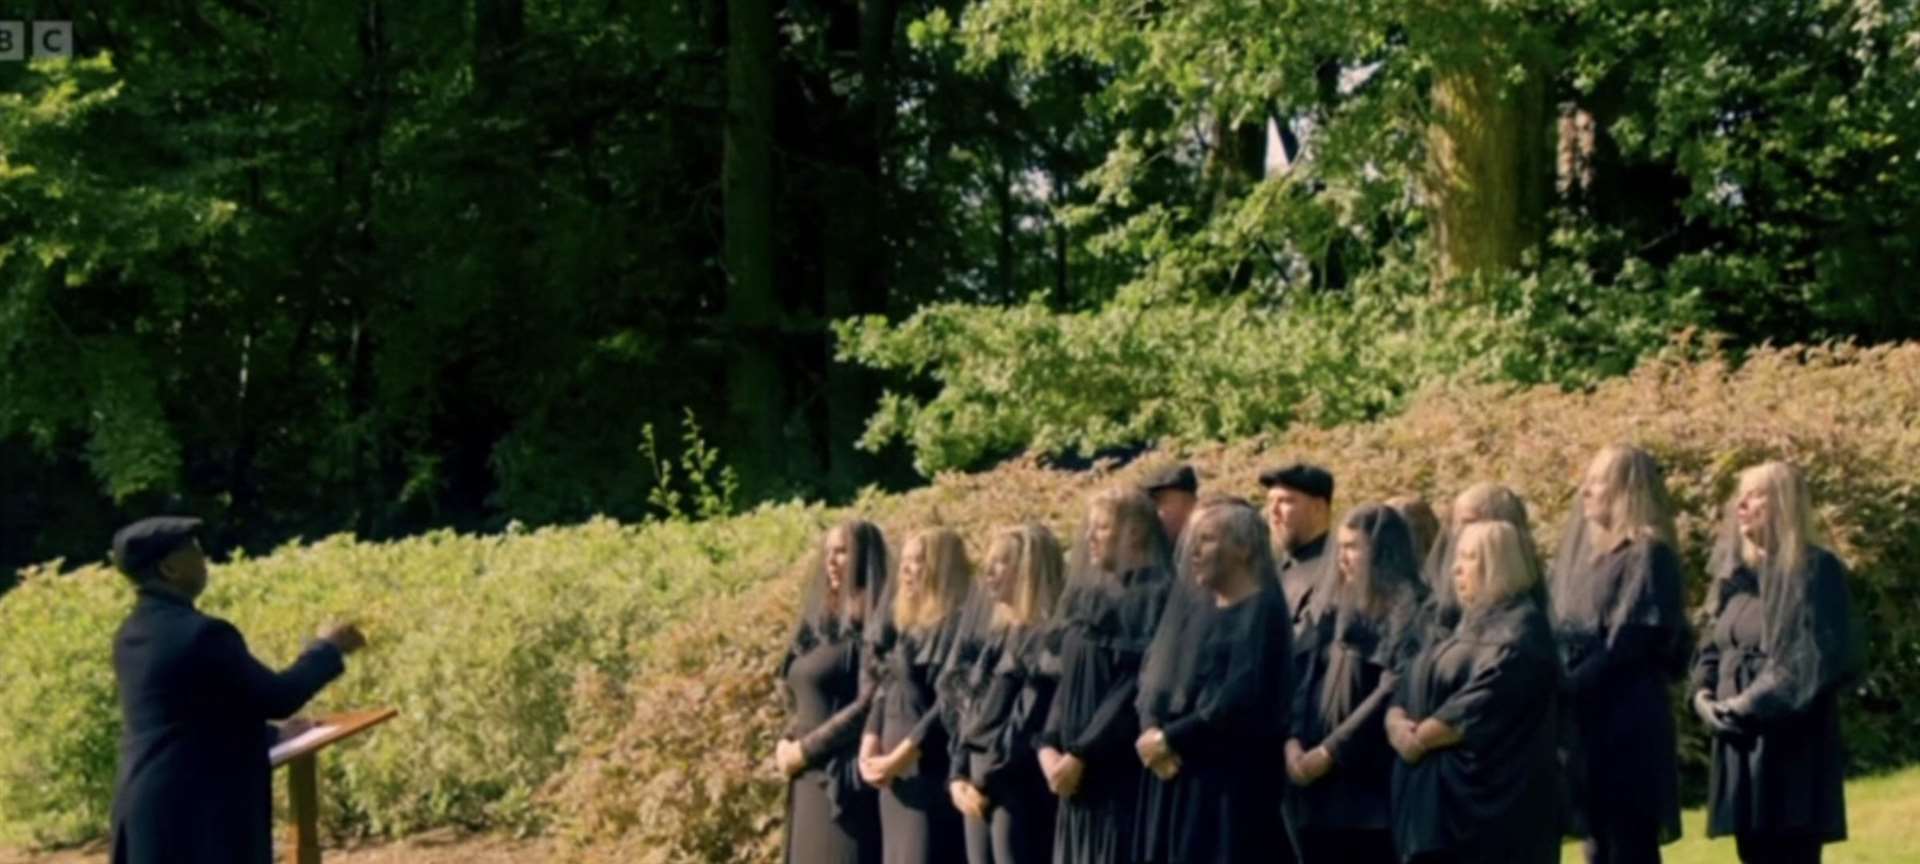 Highland Voices took part in series two of BBC's The Traitors.